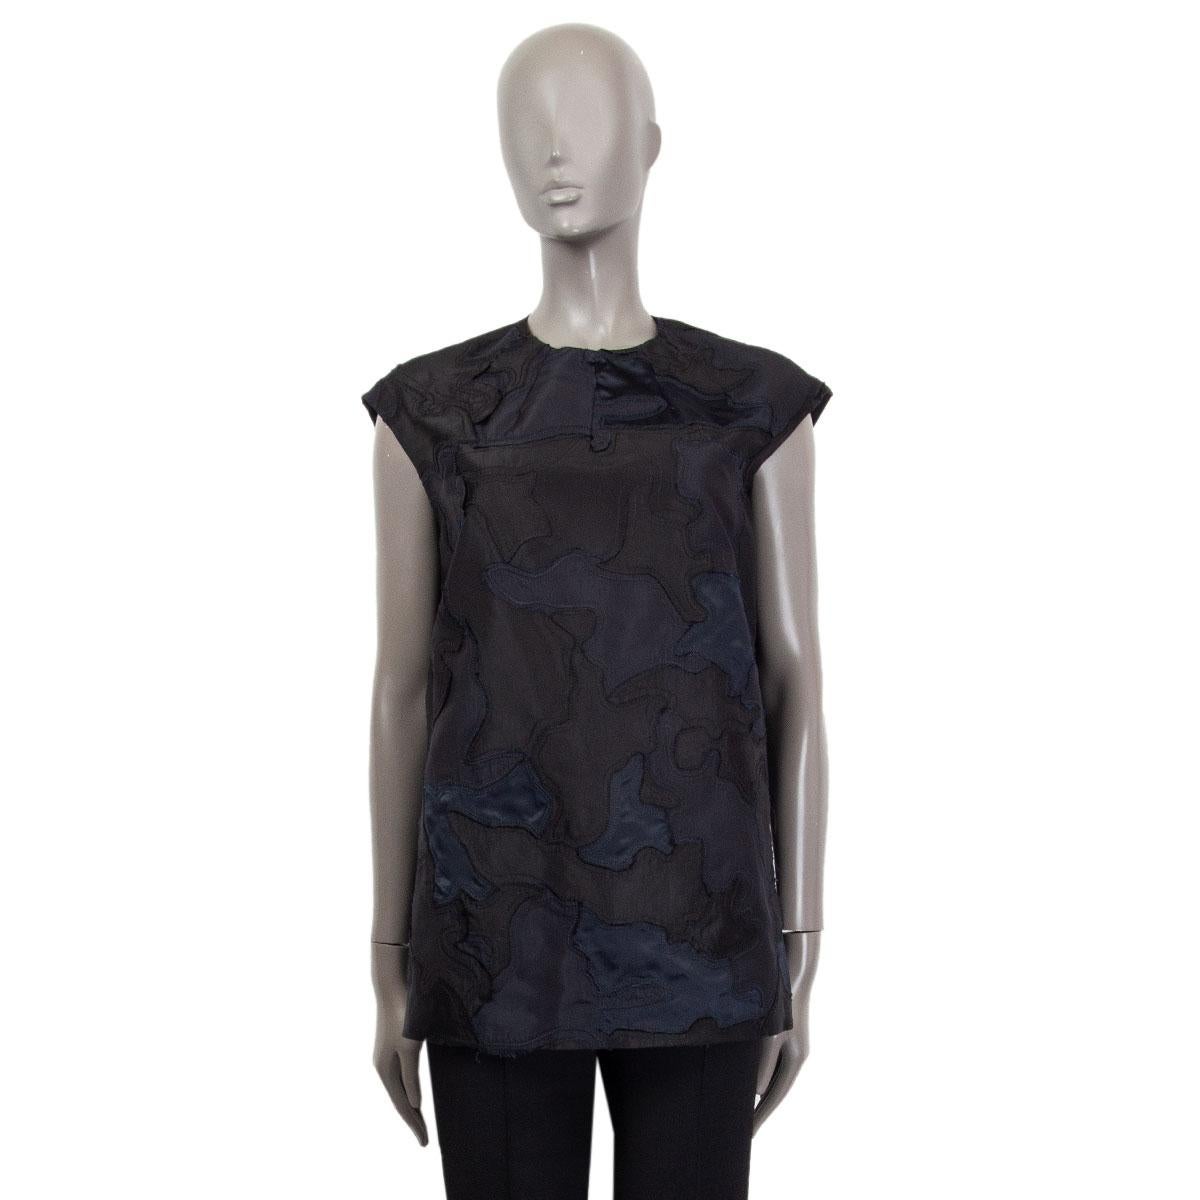 100% authentic Prada oversized sleeveless blouse in black and midnight blue in camouflage patchwork style silk (100%), wool (52%), silk (48%). Lined in black silk (56%) and polyester (44%). Keyhole detail on the back. Has been worn and is in